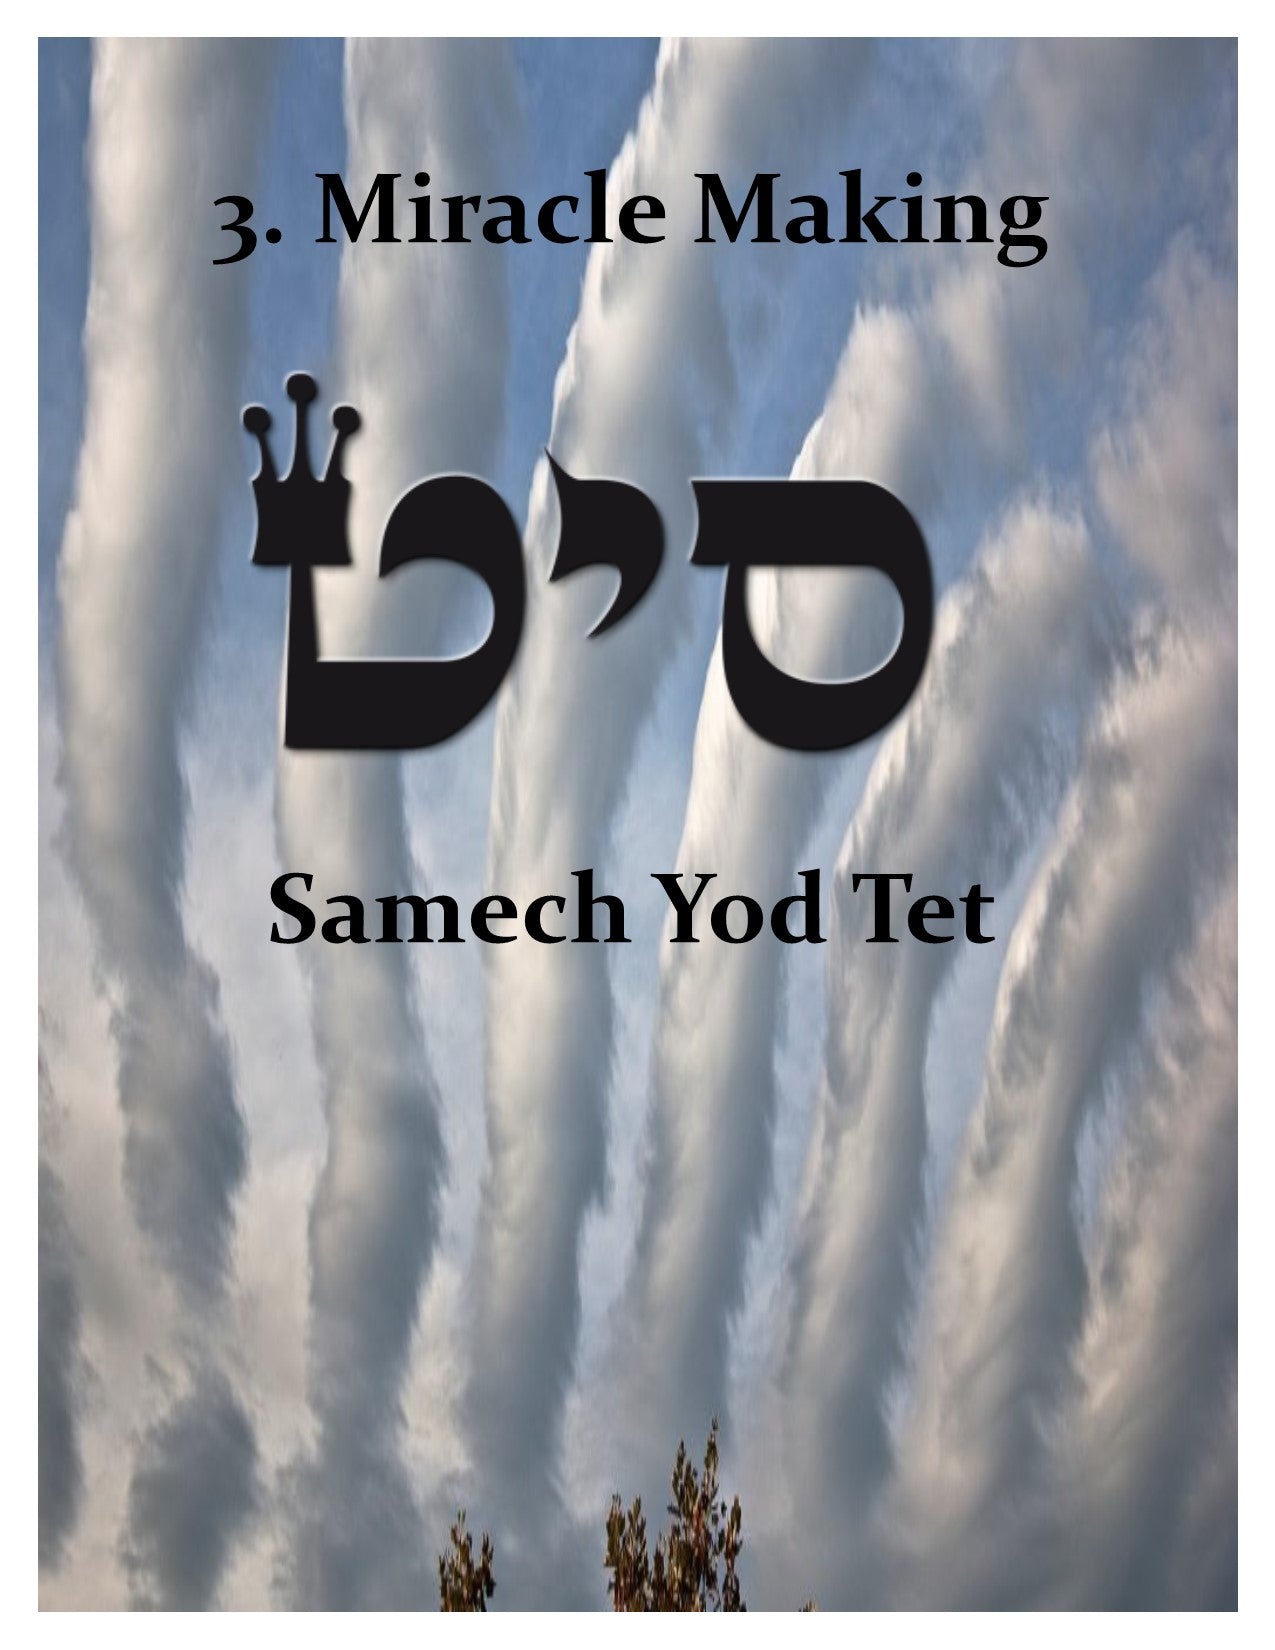 #3 Miracle Making Tuning Fork from the 72 Names of God